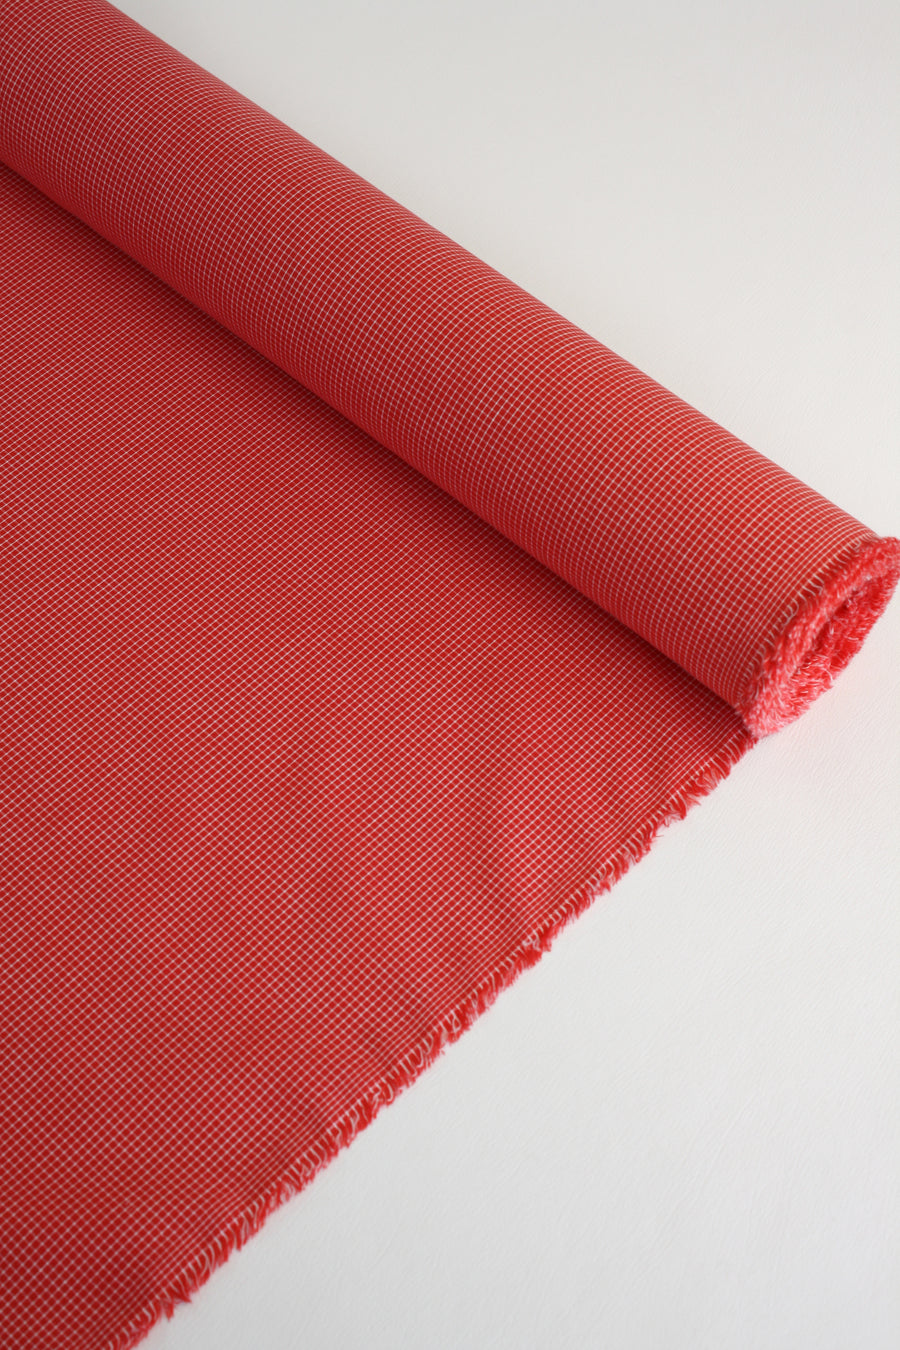 Hitome - Yarn Dyed Cotton | Rouge #4